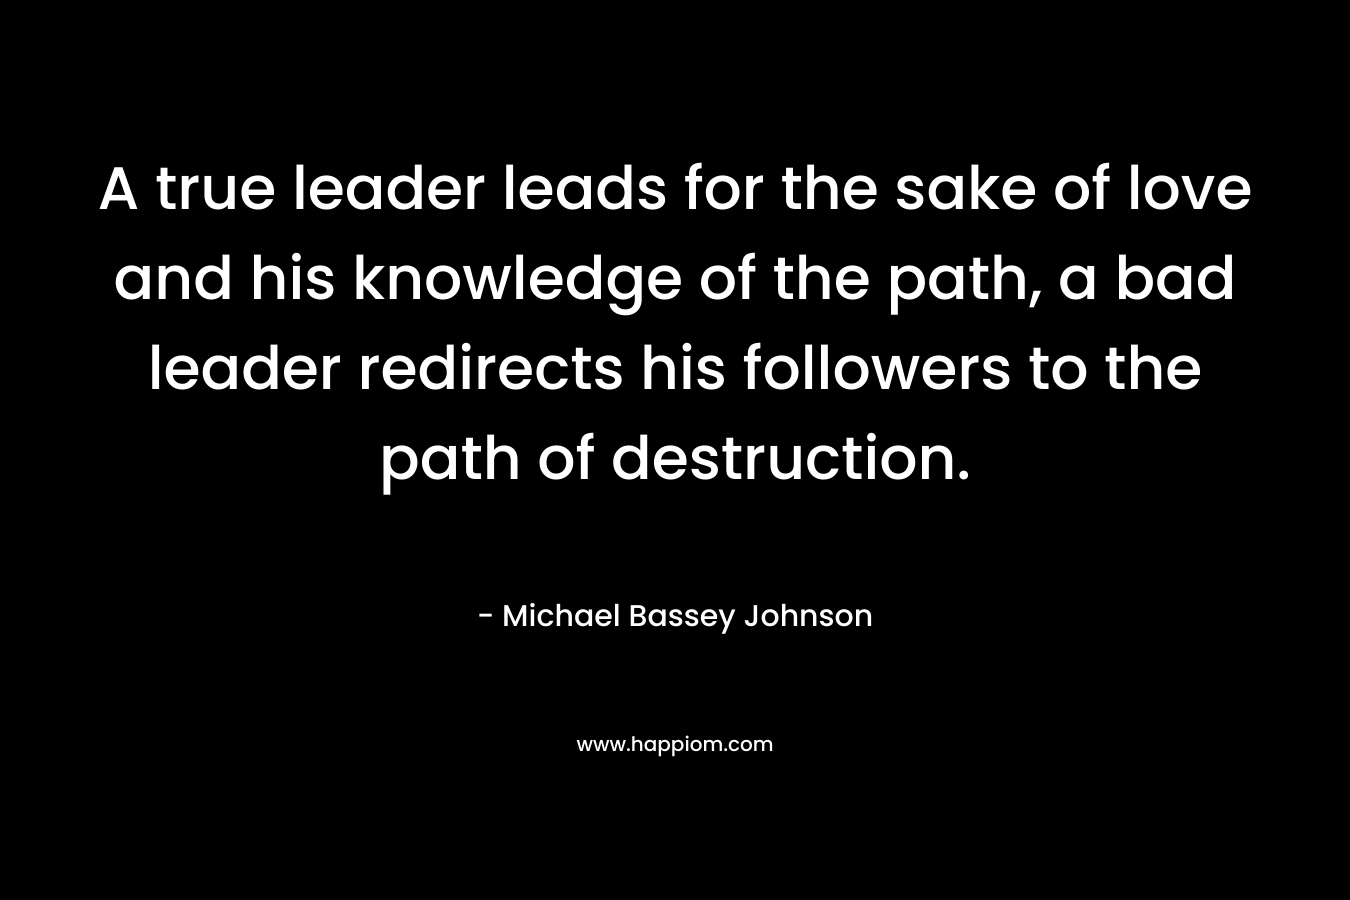 A true leader leads for the sake of love and his knowledge of the path, a bad leader redirects his followers to the path of destruction.